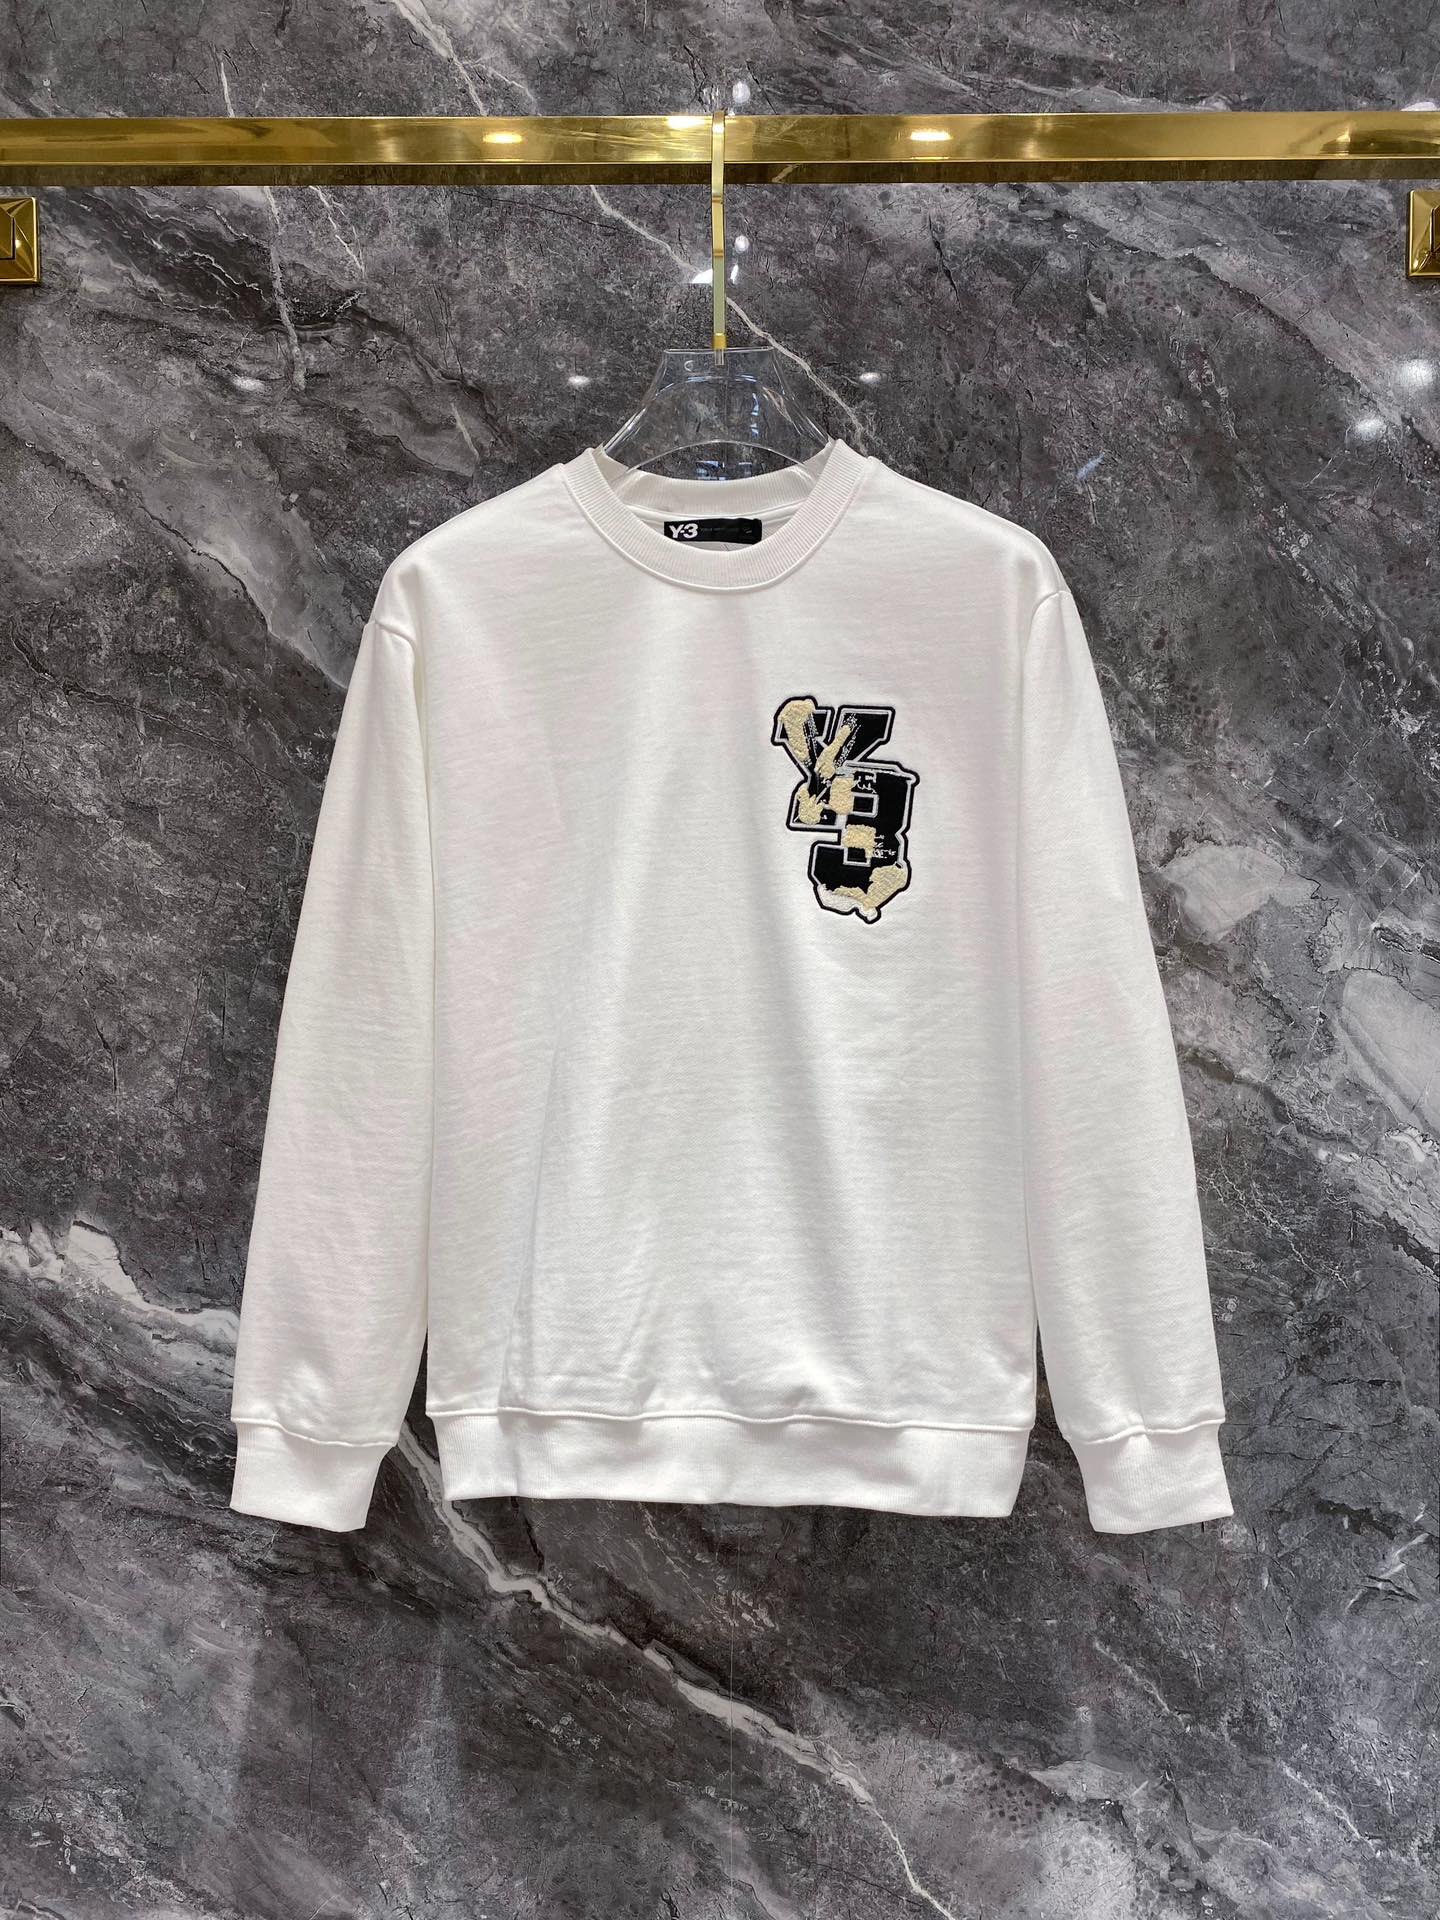 Y-3 Clothing Sweatshirts Top Fake Designer
 Embroidery Fall/Winter Collection